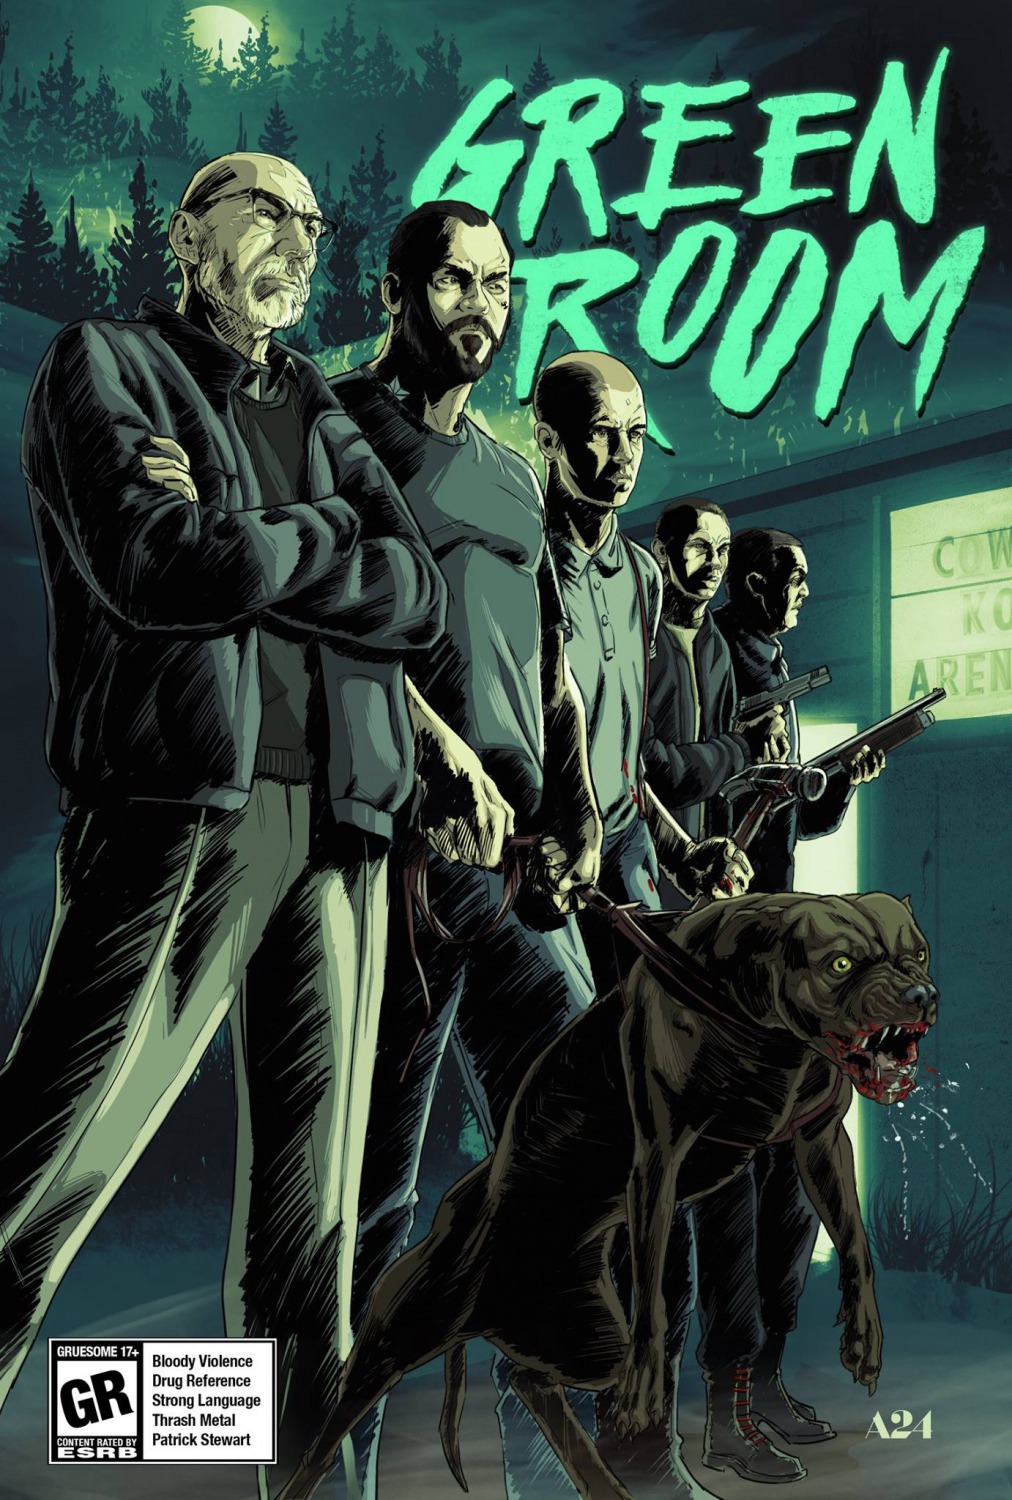 Extra Large Movie Poster Image for Green Room (#5 of 10)